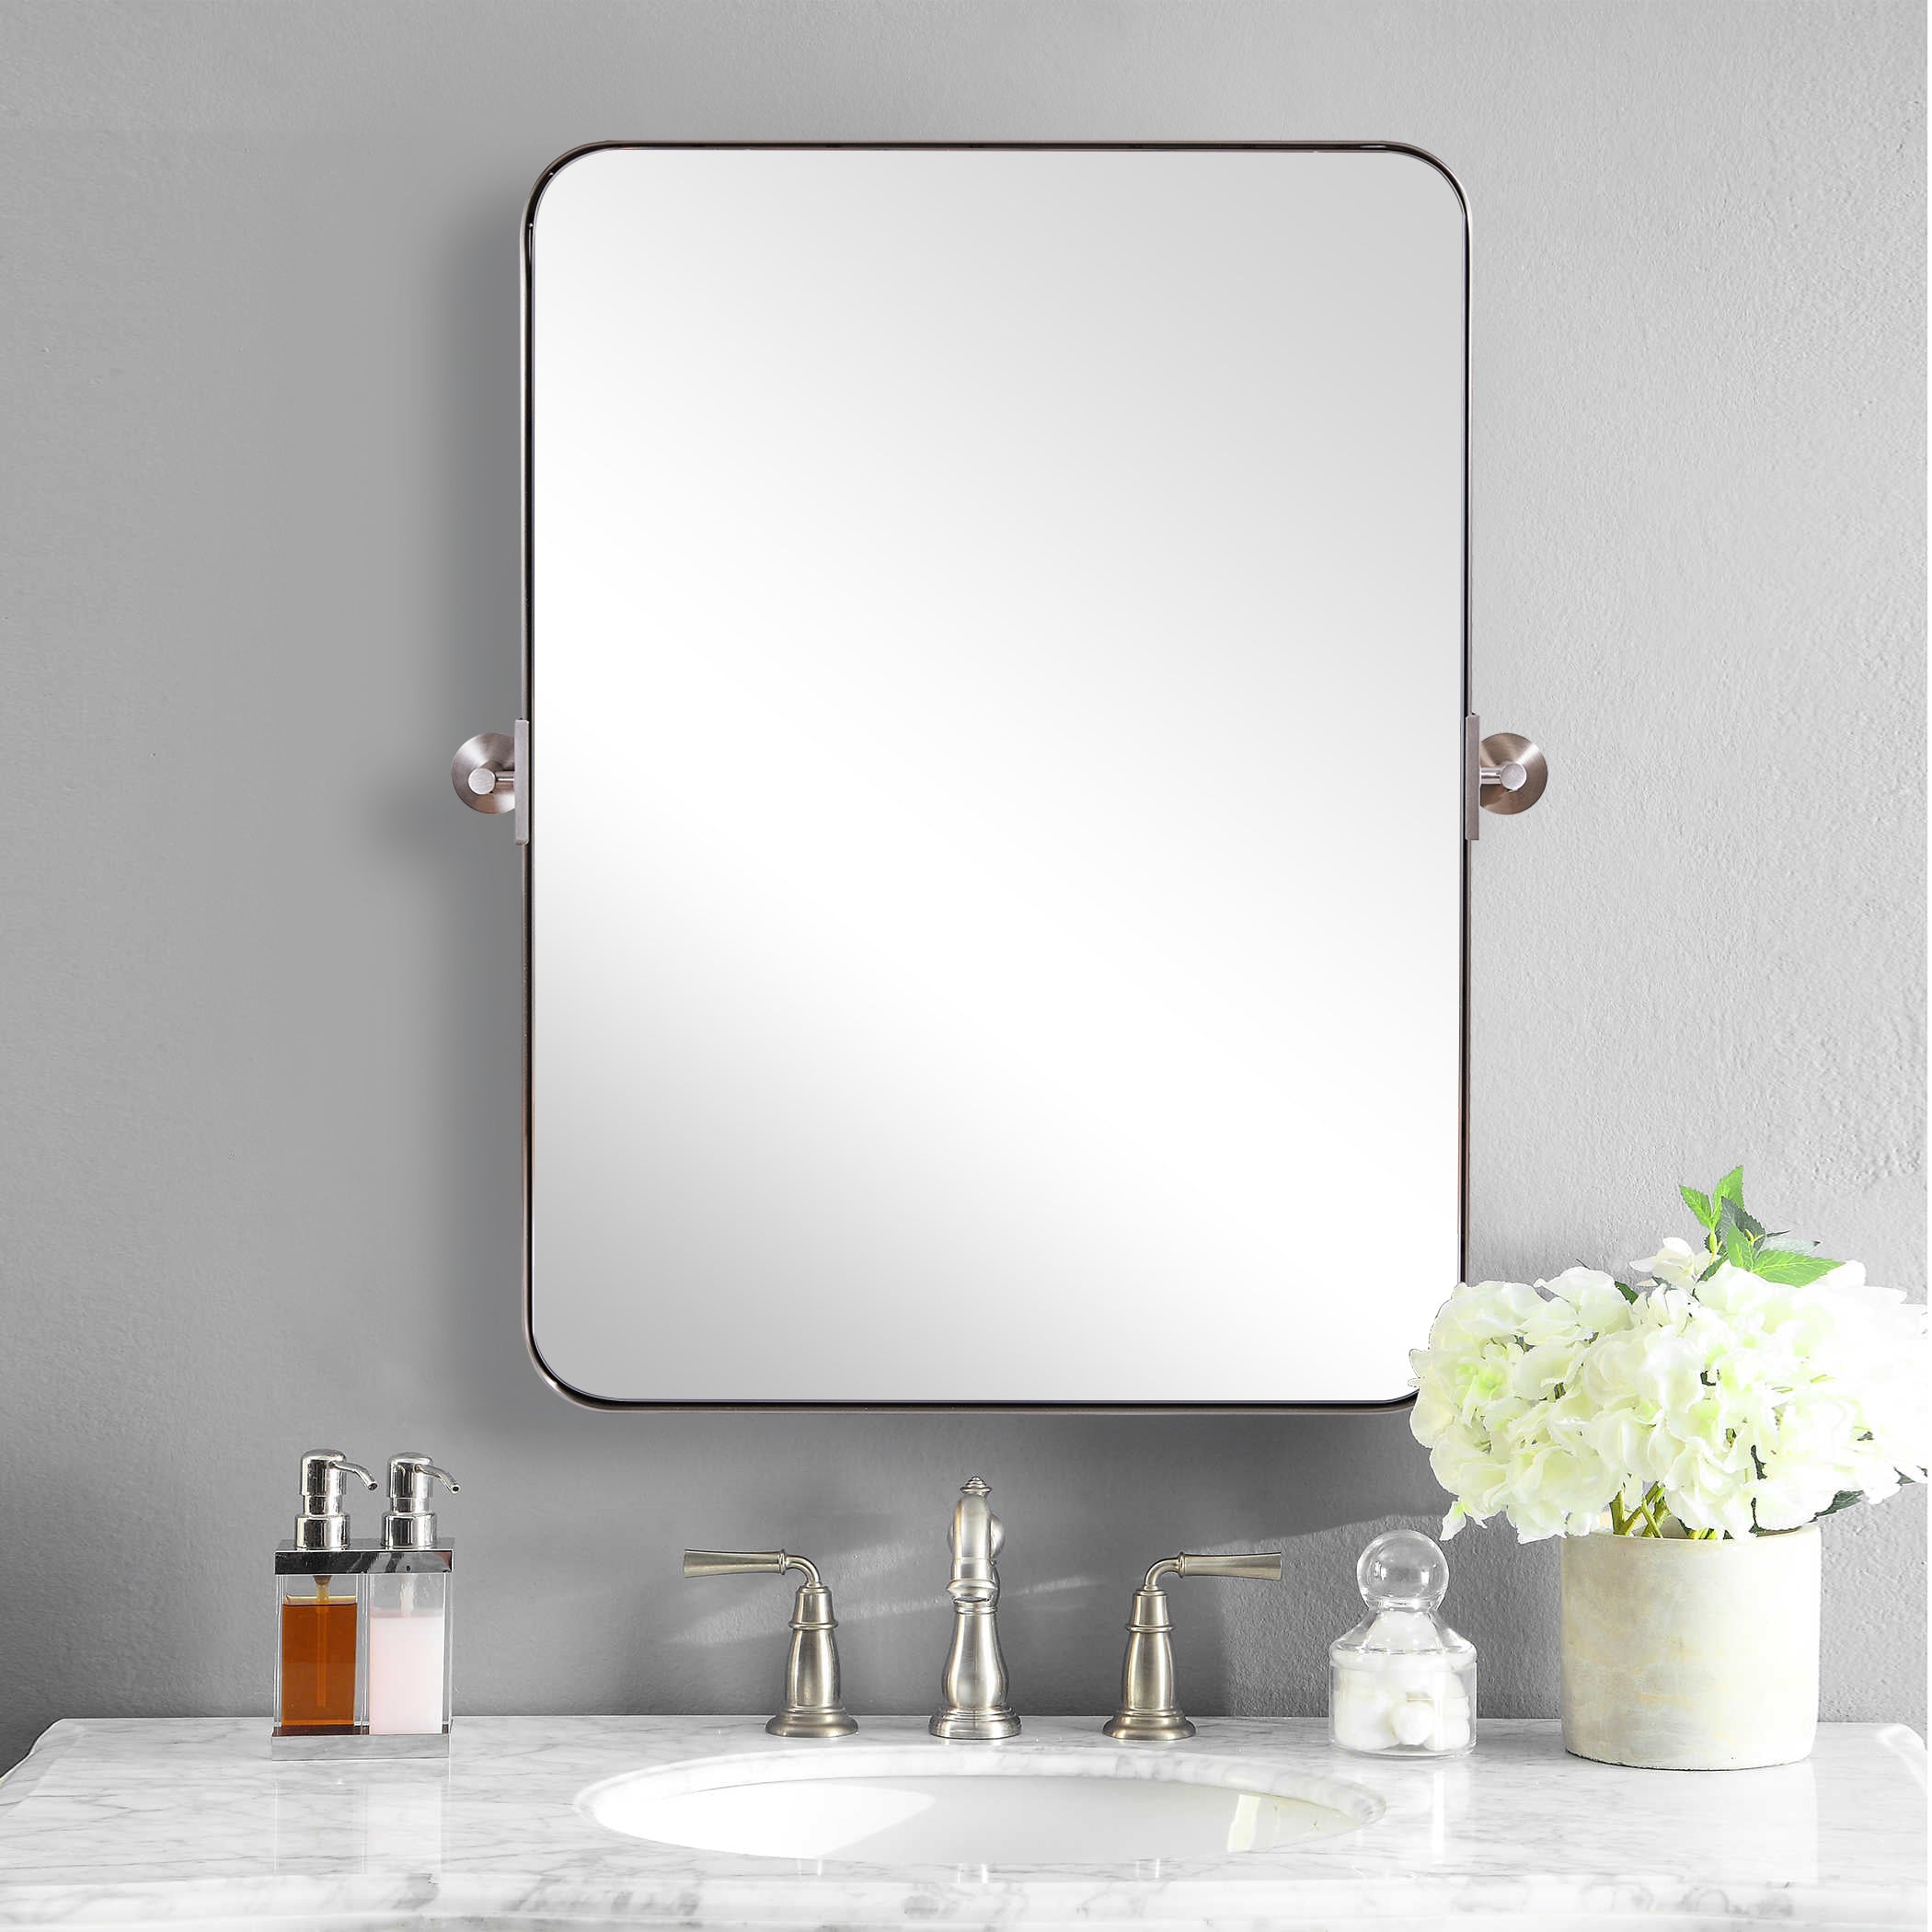 Modern Tilting Pivot Mirror for Bathroom Vanity Rounded Rectangle Mirror Adjustable Swivel Wall Mirror| Stainless Steel Frame Mounted Vertically#color_polished chrome